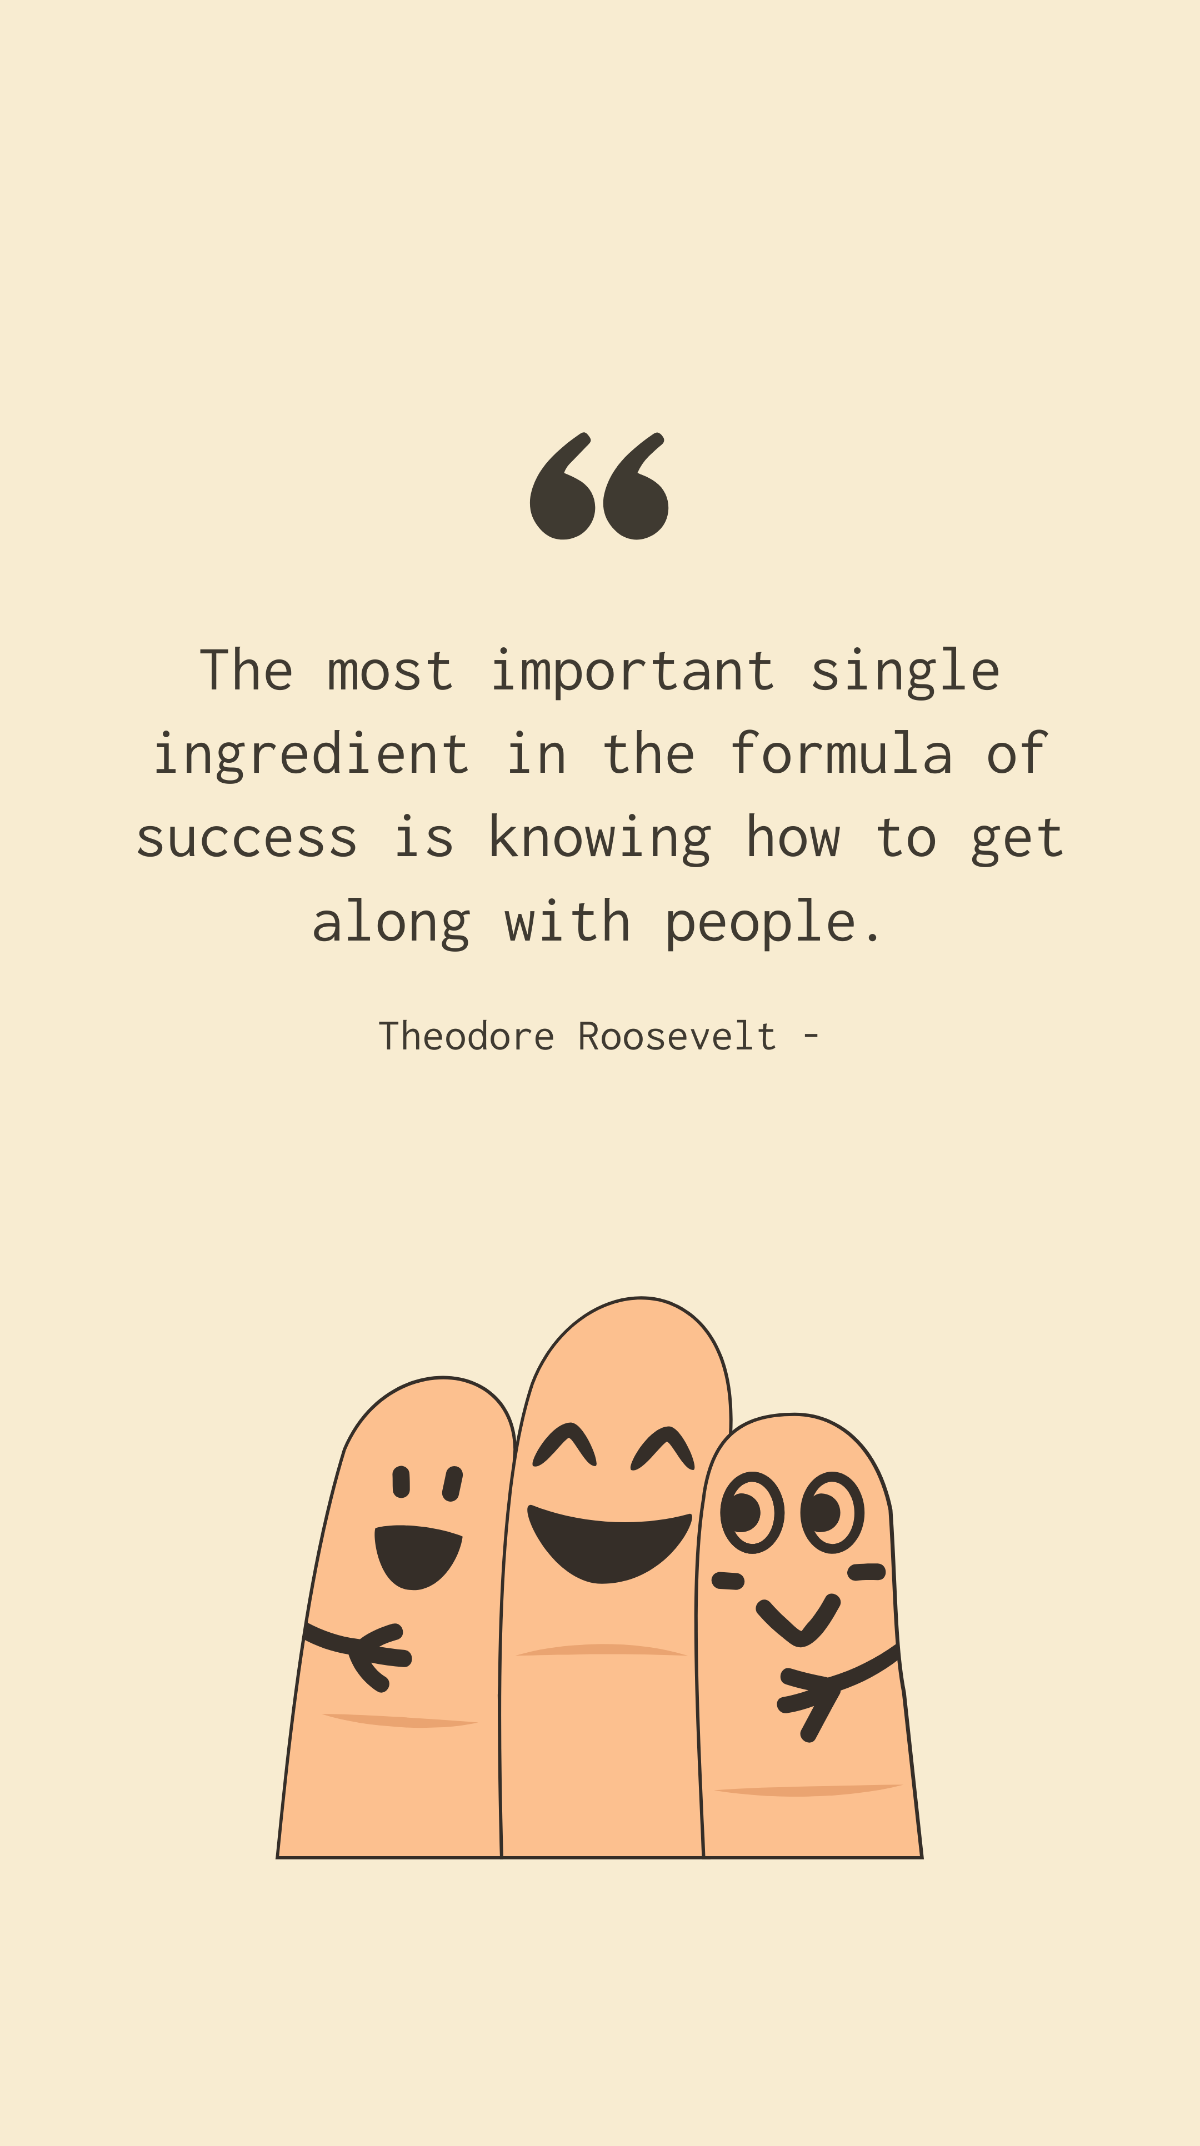 Theodore Roosevelt - The most important single ingredient in the formula of success is knowing how to get along with people.